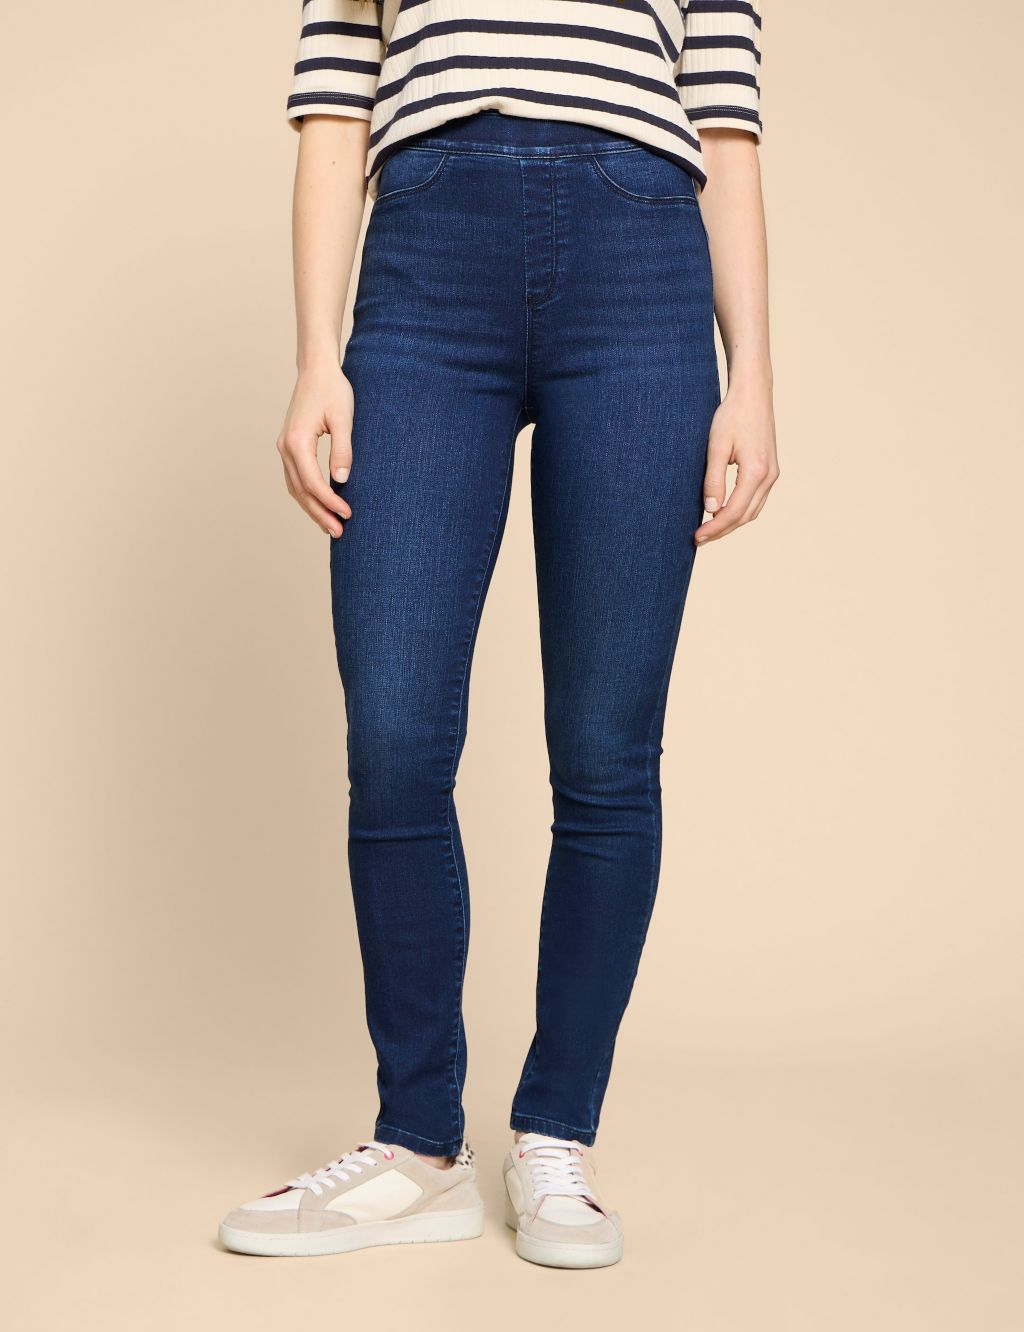 Women's Jeans & Jeggings, Phase Eight